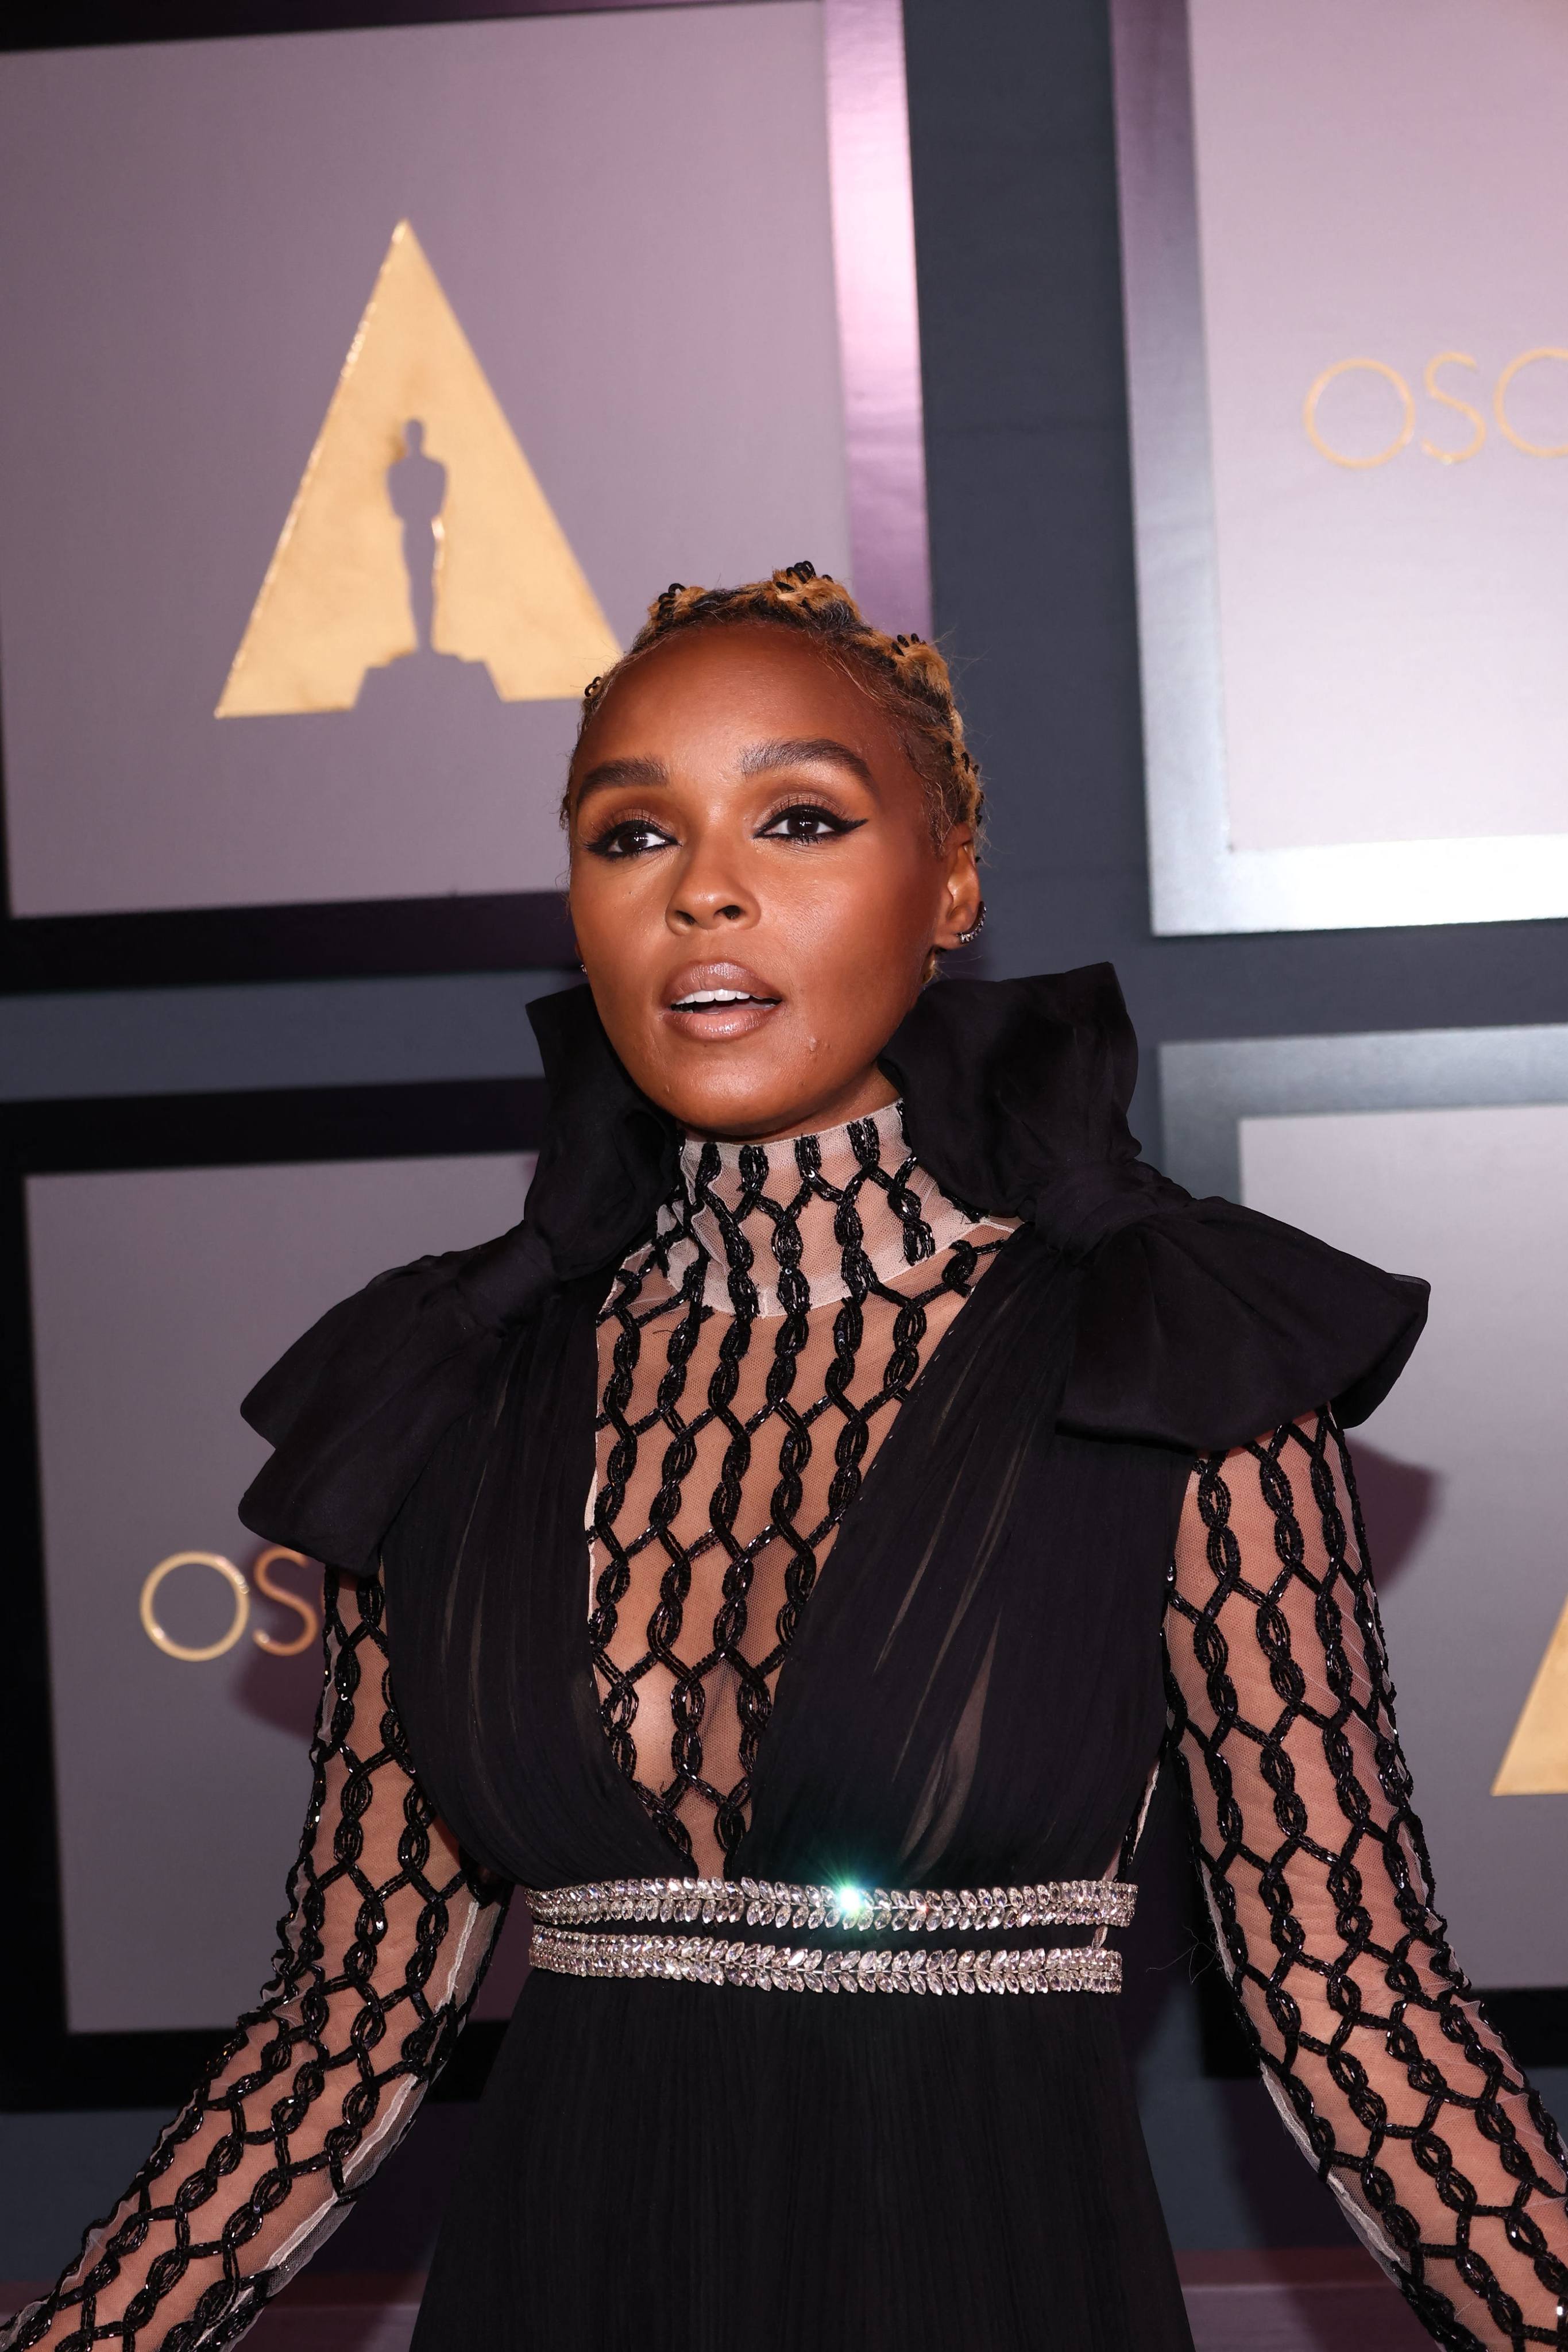 US singer Janelle Monáe at the Governors Awards ceremony at the Fairmont Century Plaza in Los Angeles in 2022. The singer, rapper, actress and sci-fi writer is “a true artist” says Rian Johnson, who directed her in “Glass Onion: A Knives Out Mystery”. Photo: AFP